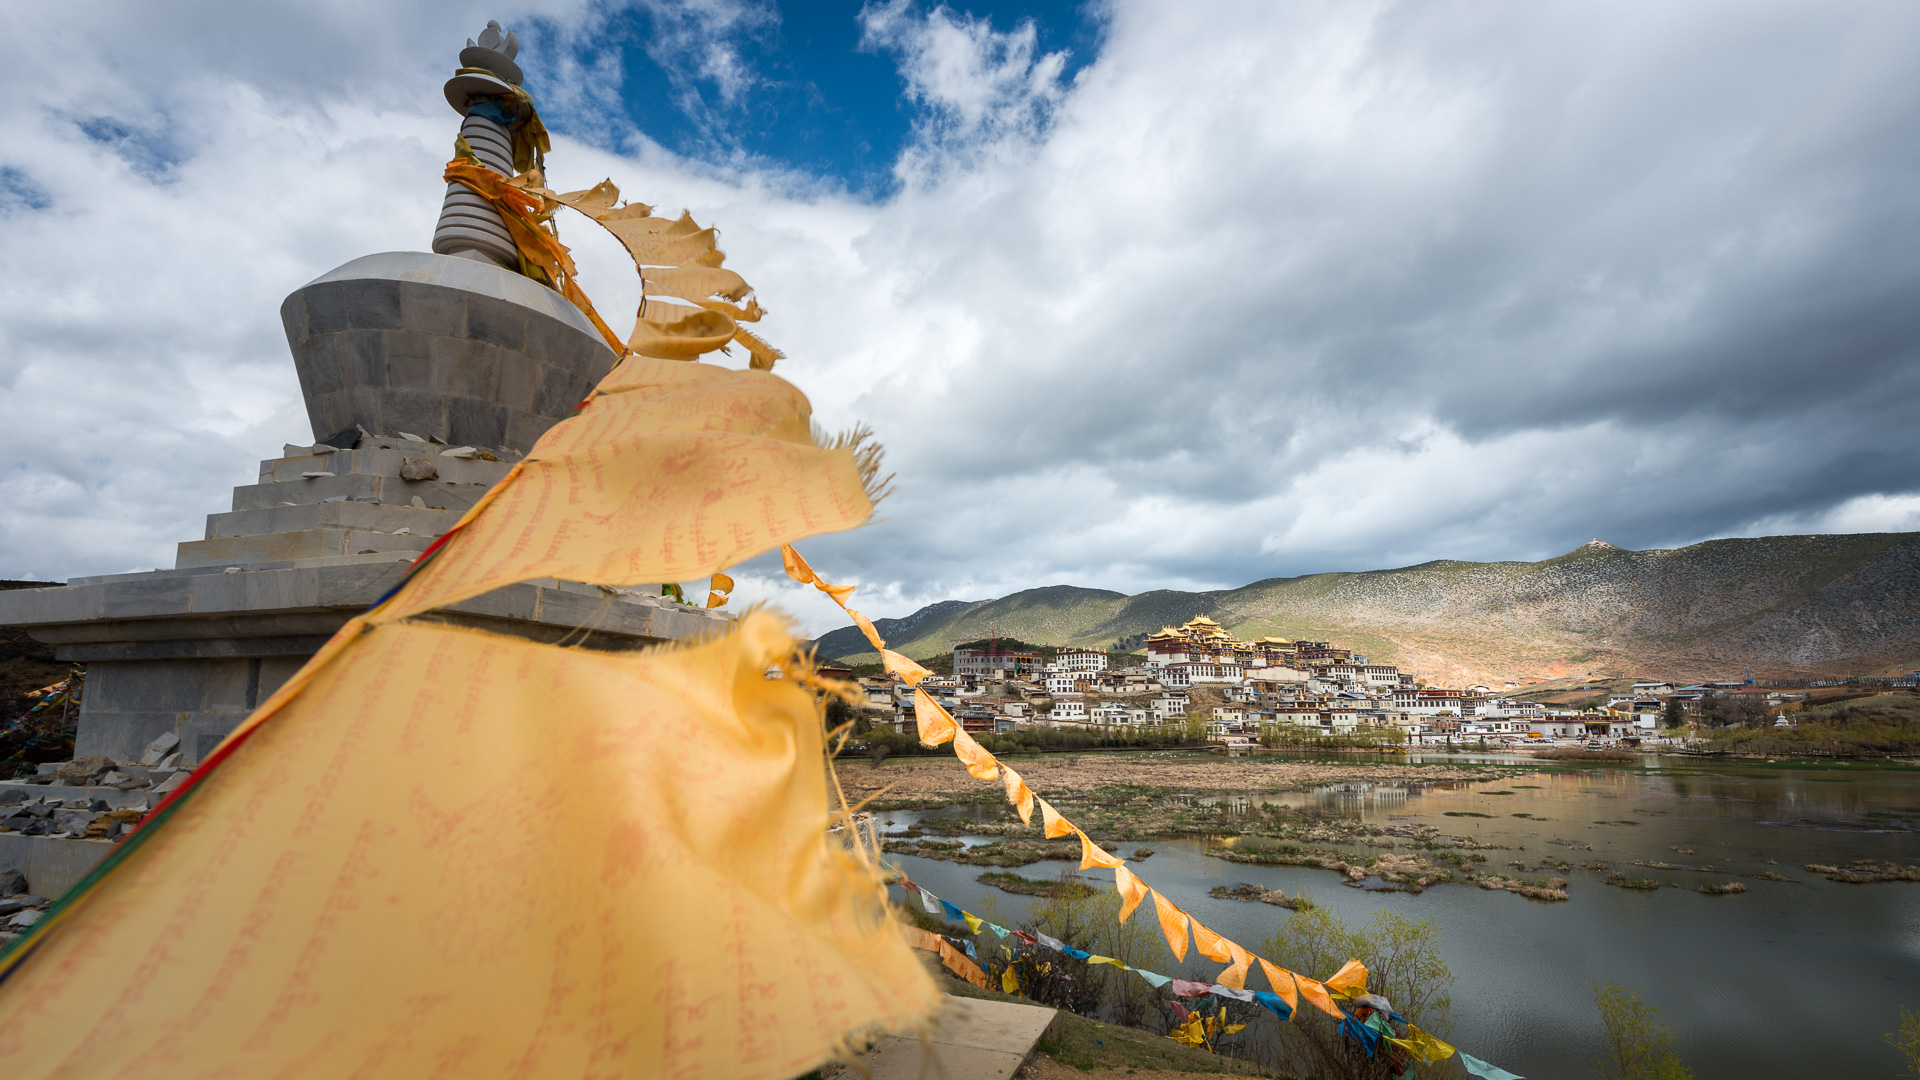 SongZanLin monastery is the largest Tibetan Buddhist monastery in Yunnan province